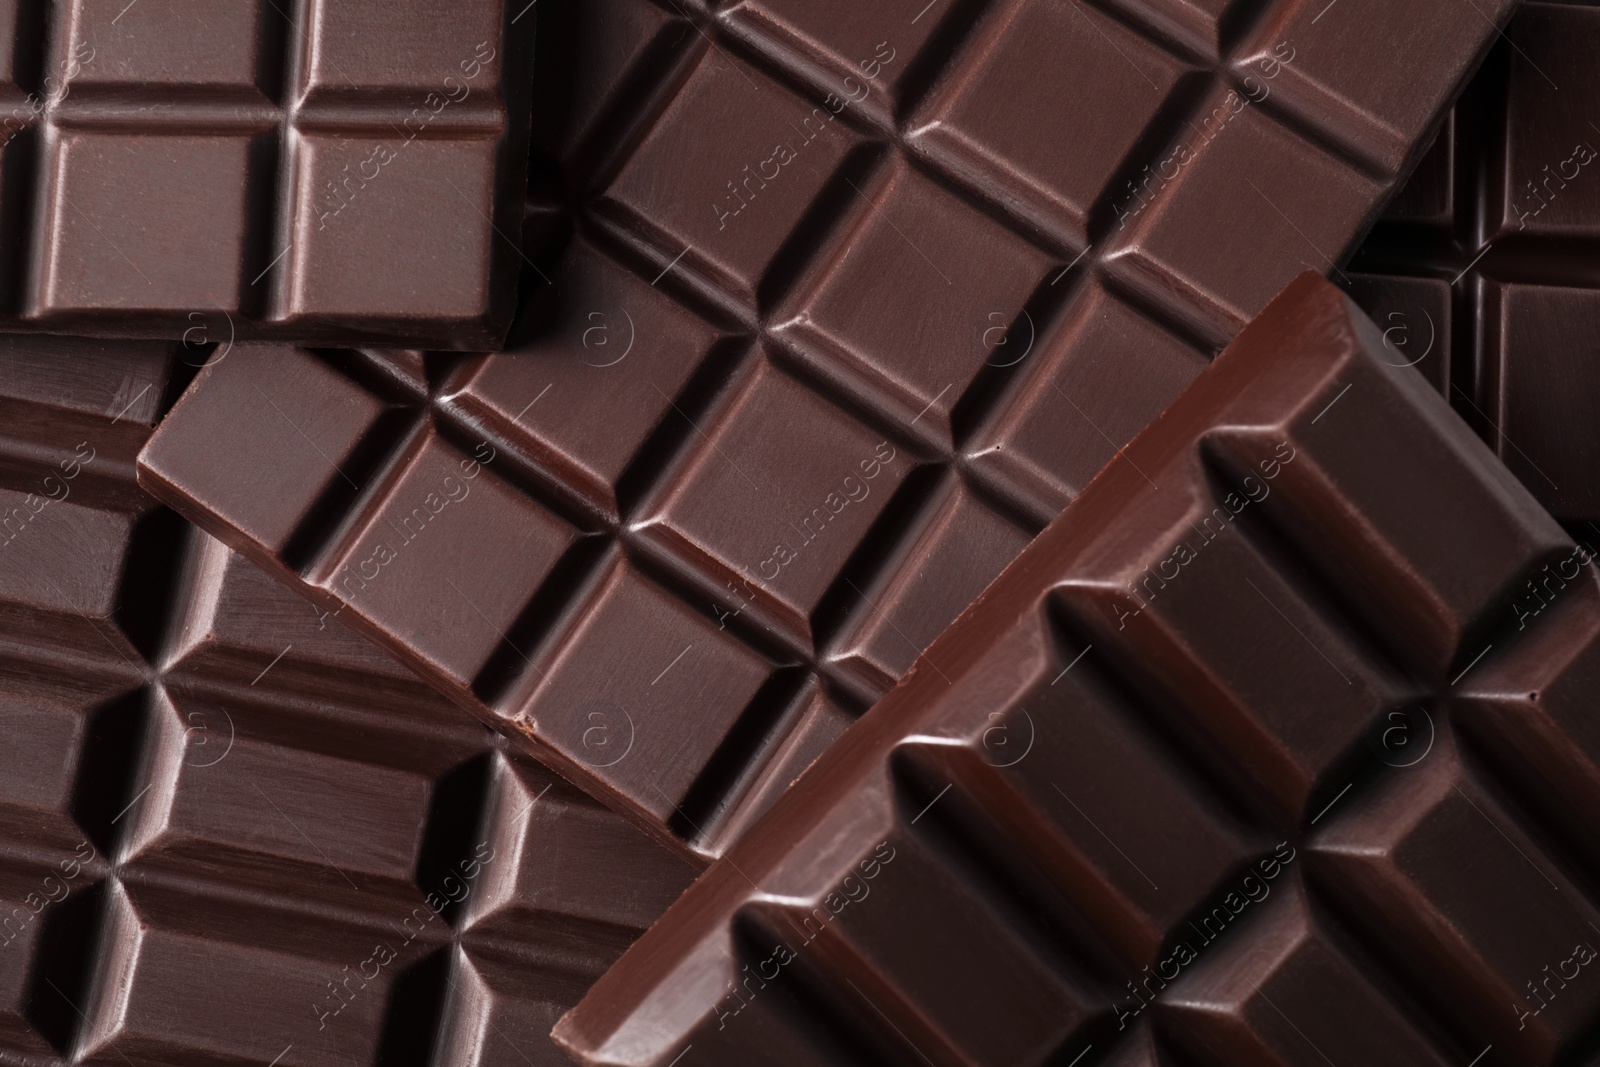 Photo of Many delicious dark chocolate bars as background, top view